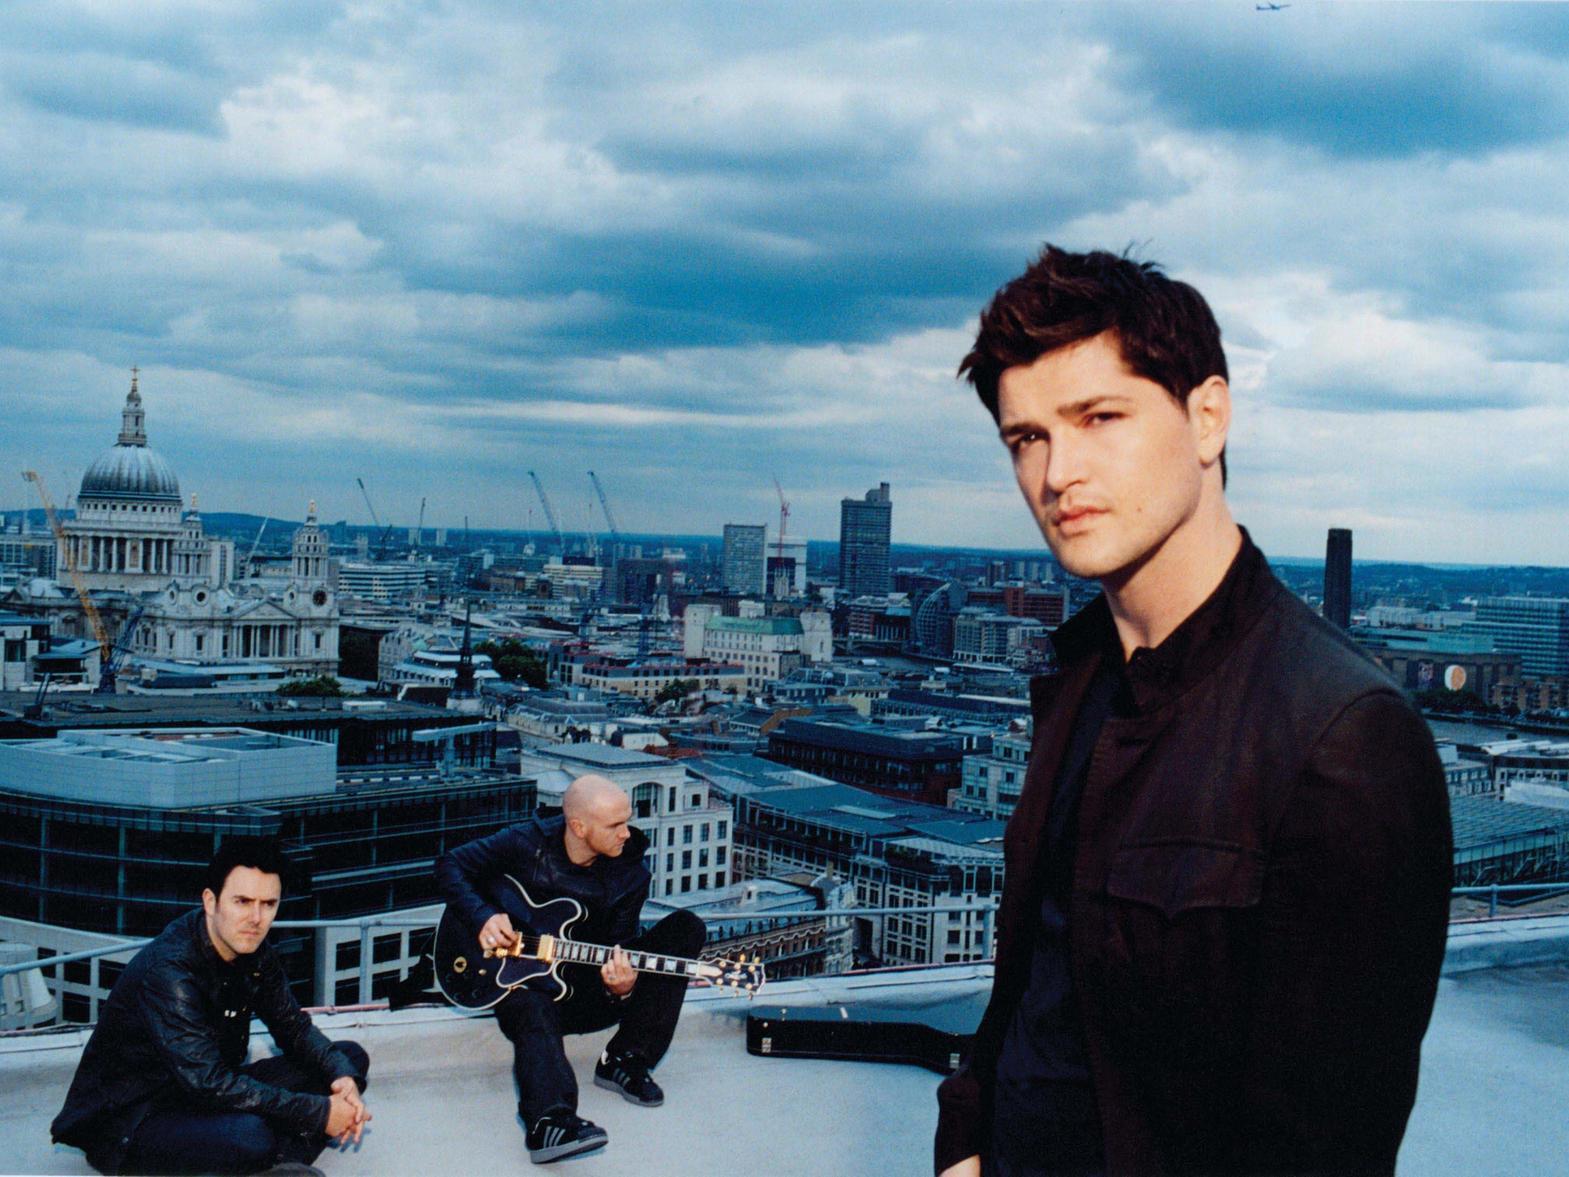 21 February: The tour will promote The Script's new album Sunsets & Full Moons. Supported by hit singer Becky Hill